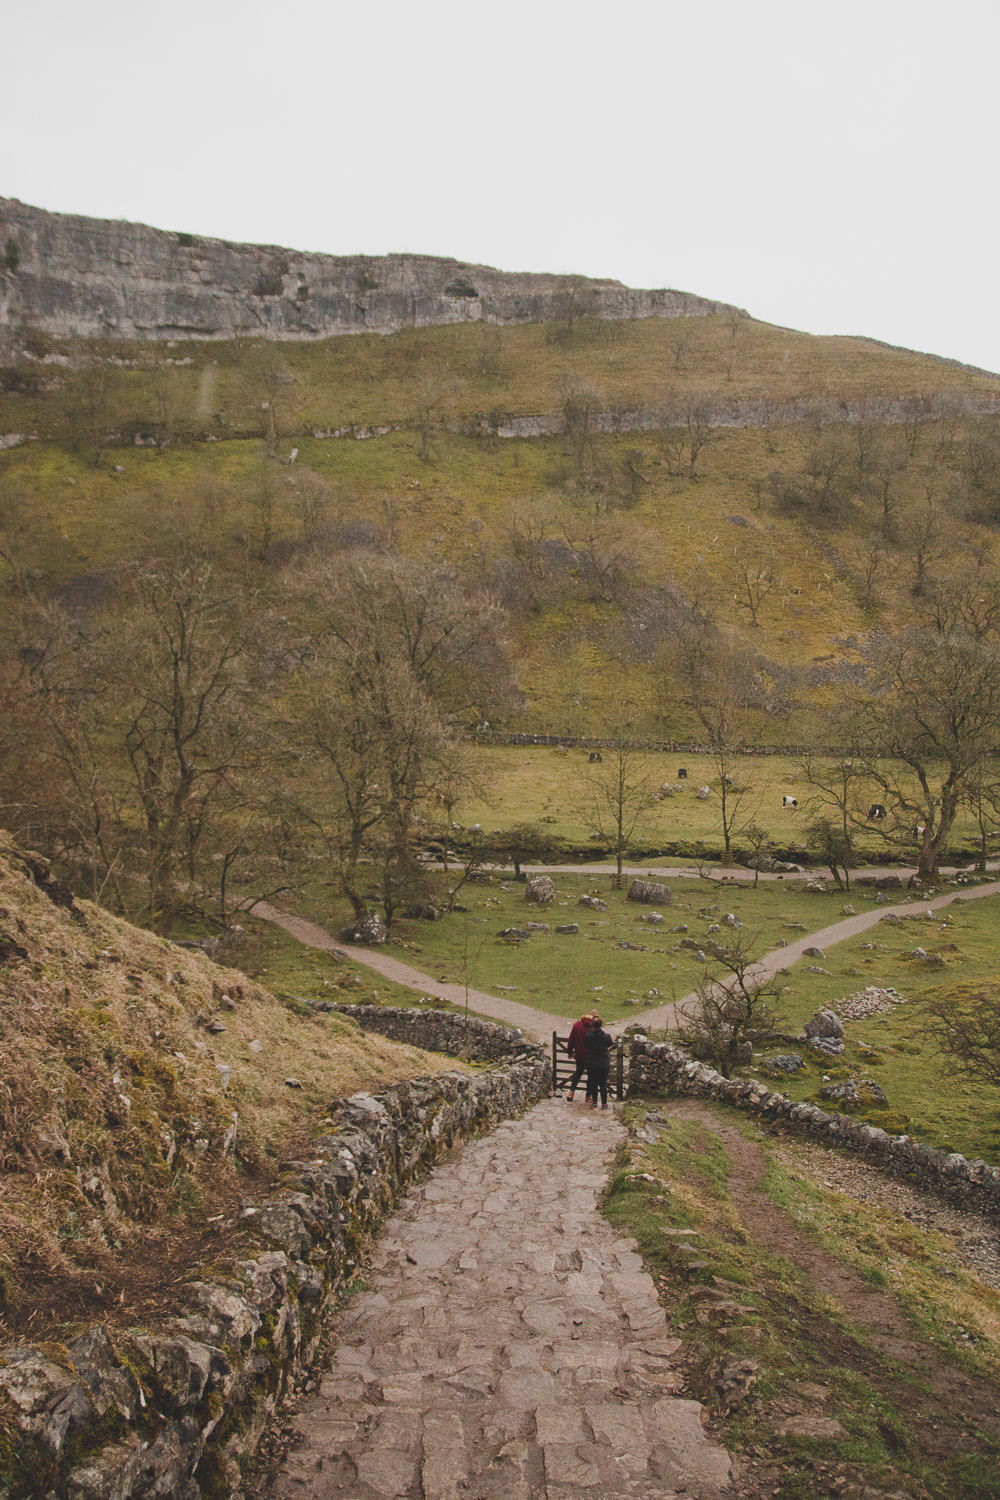 Malham Cove in the Yorkshire Dales National Park